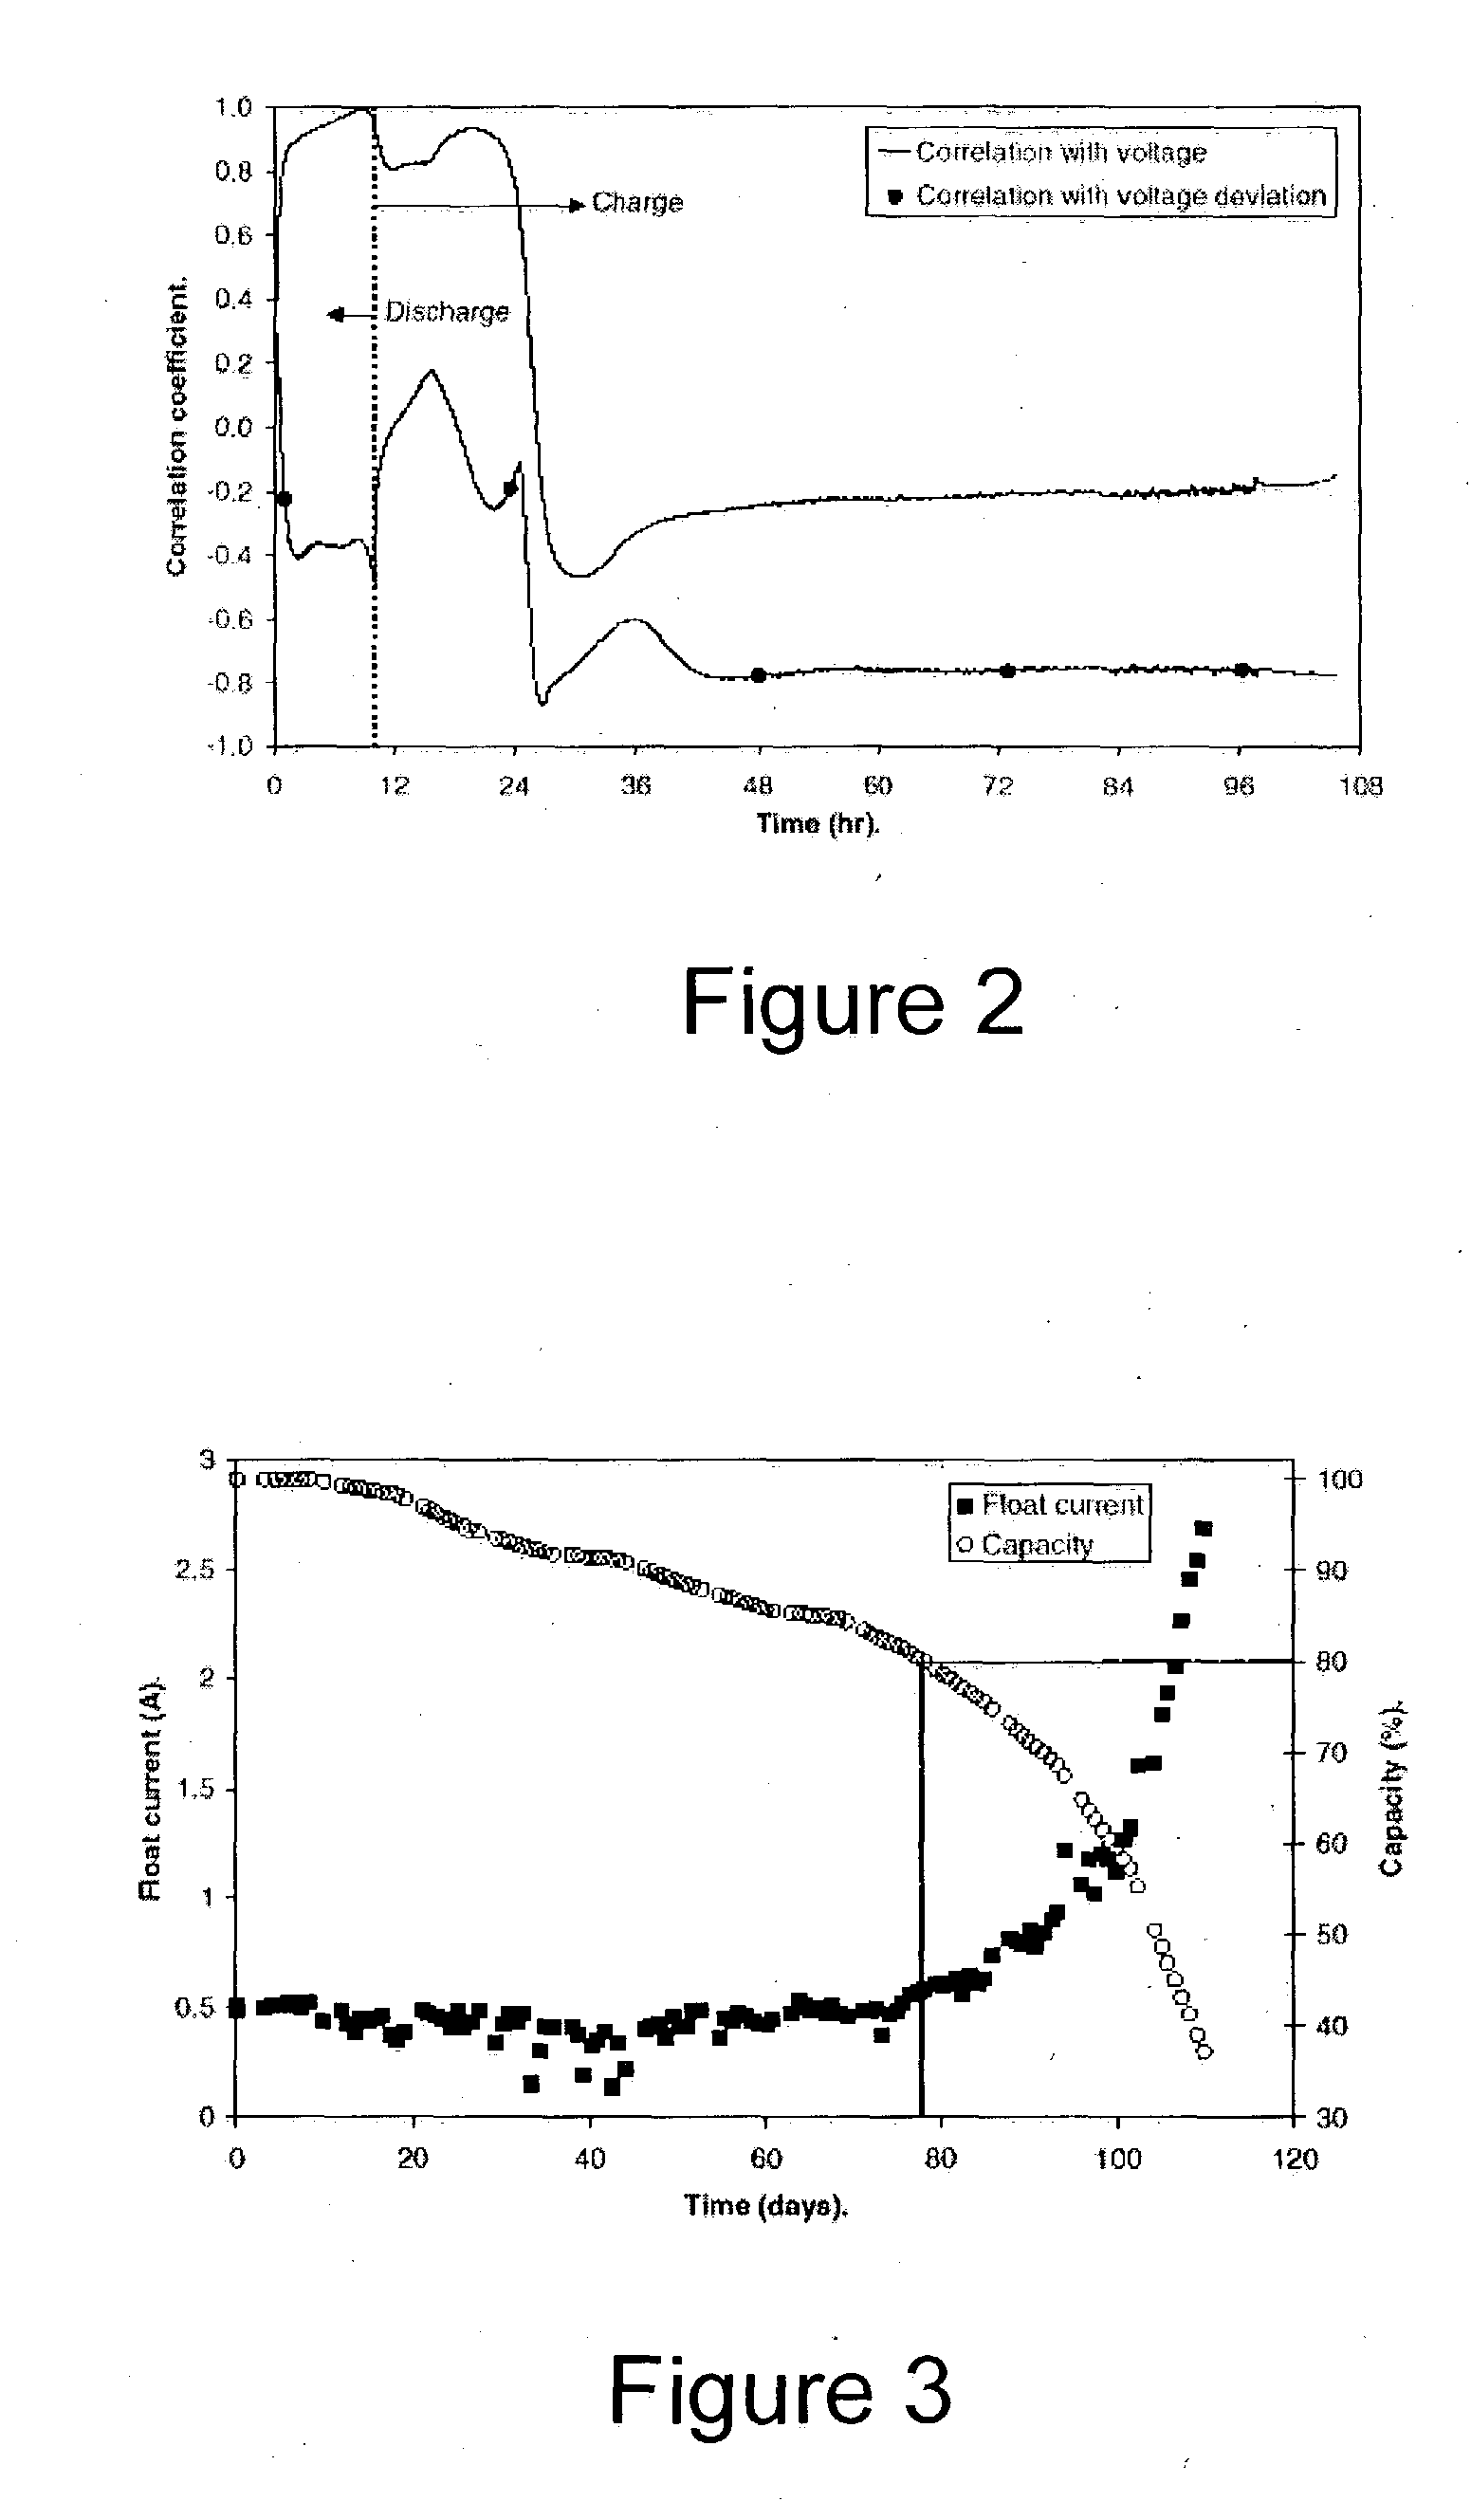 Apparatus, methods and computer program products for estimation of battery reserve life using adaptively modified state of health indicator-based reserve life models